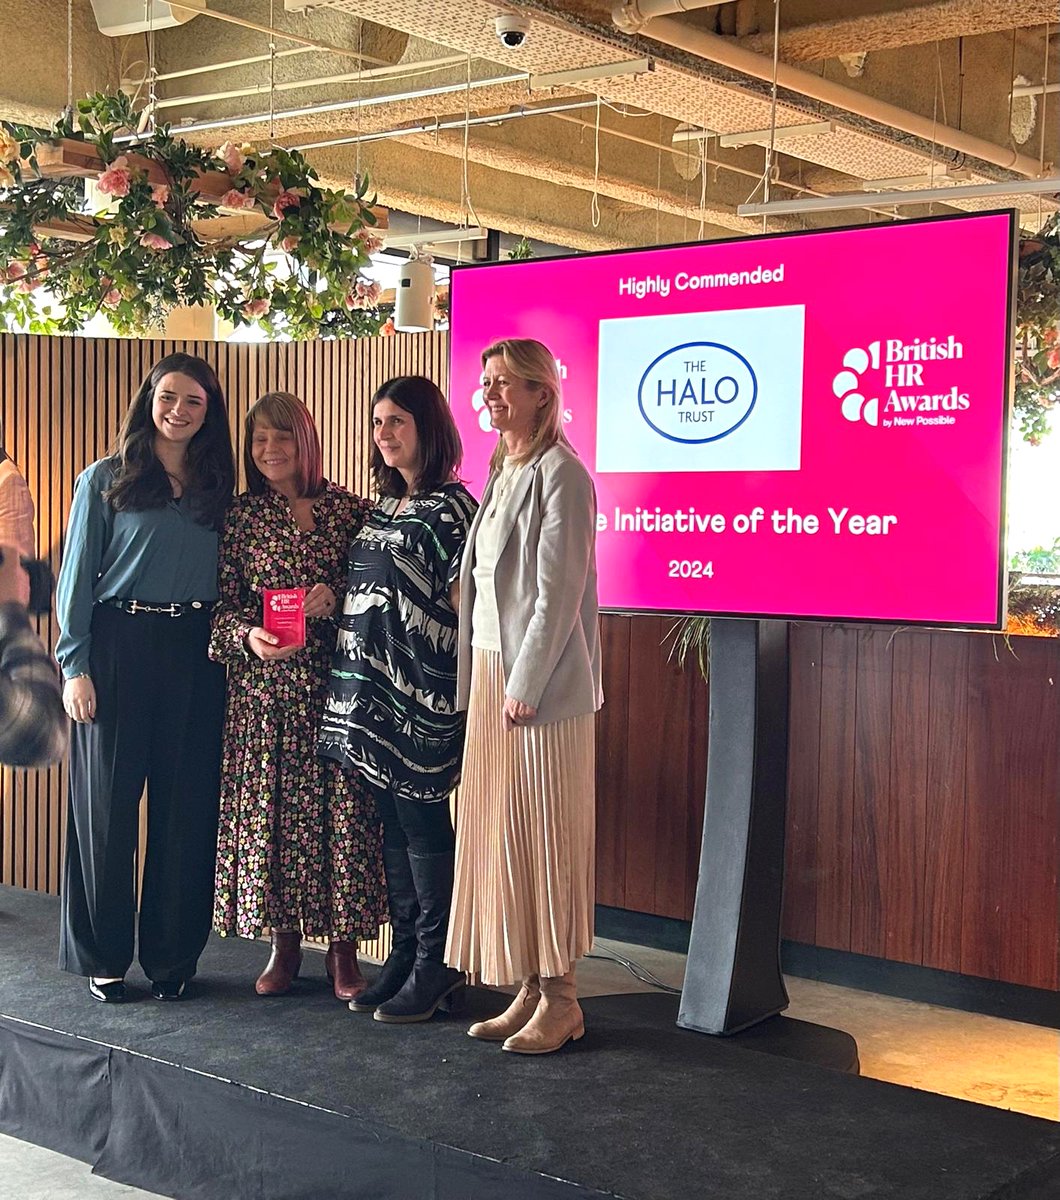 🎉 Delighted to announce that we have been commended for 'Culture Initiative of the Year' at the @BritishHRAwards 2024! A proud moment for the whole team who continue to build a workplace culture that values and supports all our incredible staff.🏆